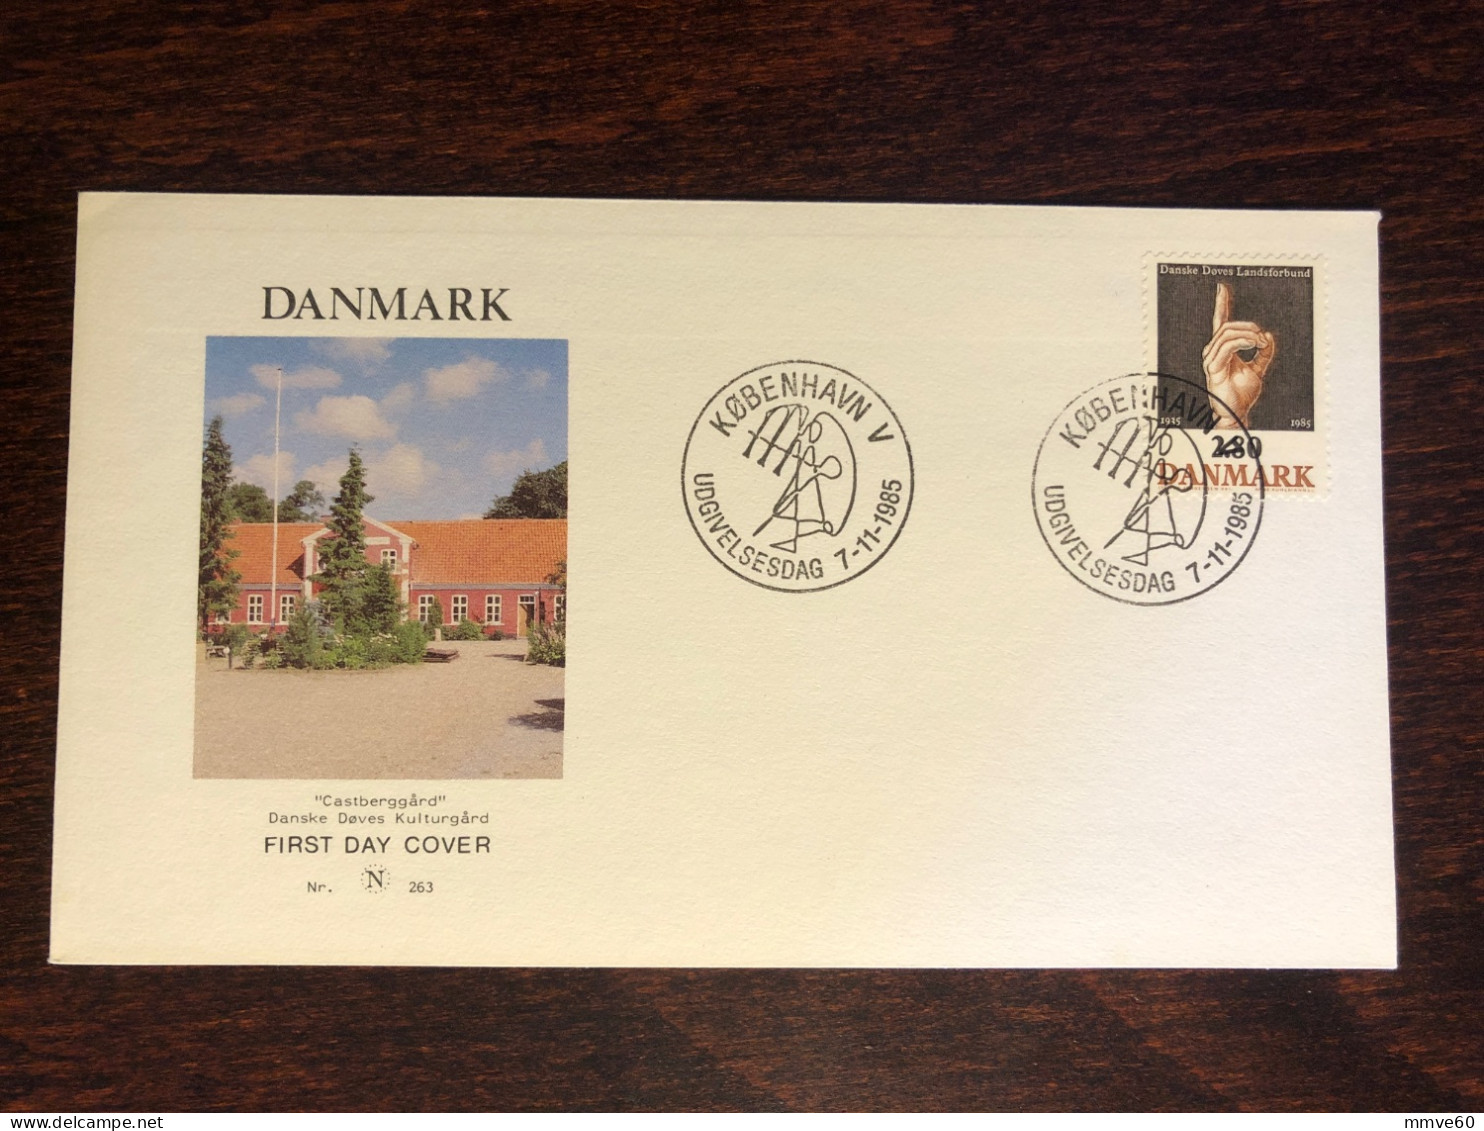 DENMARK FDC COVER 1985 YEAR DEAF PEOPLE SIGN LANGUAGE HEALTH MEDICINE STAMPS - FDC